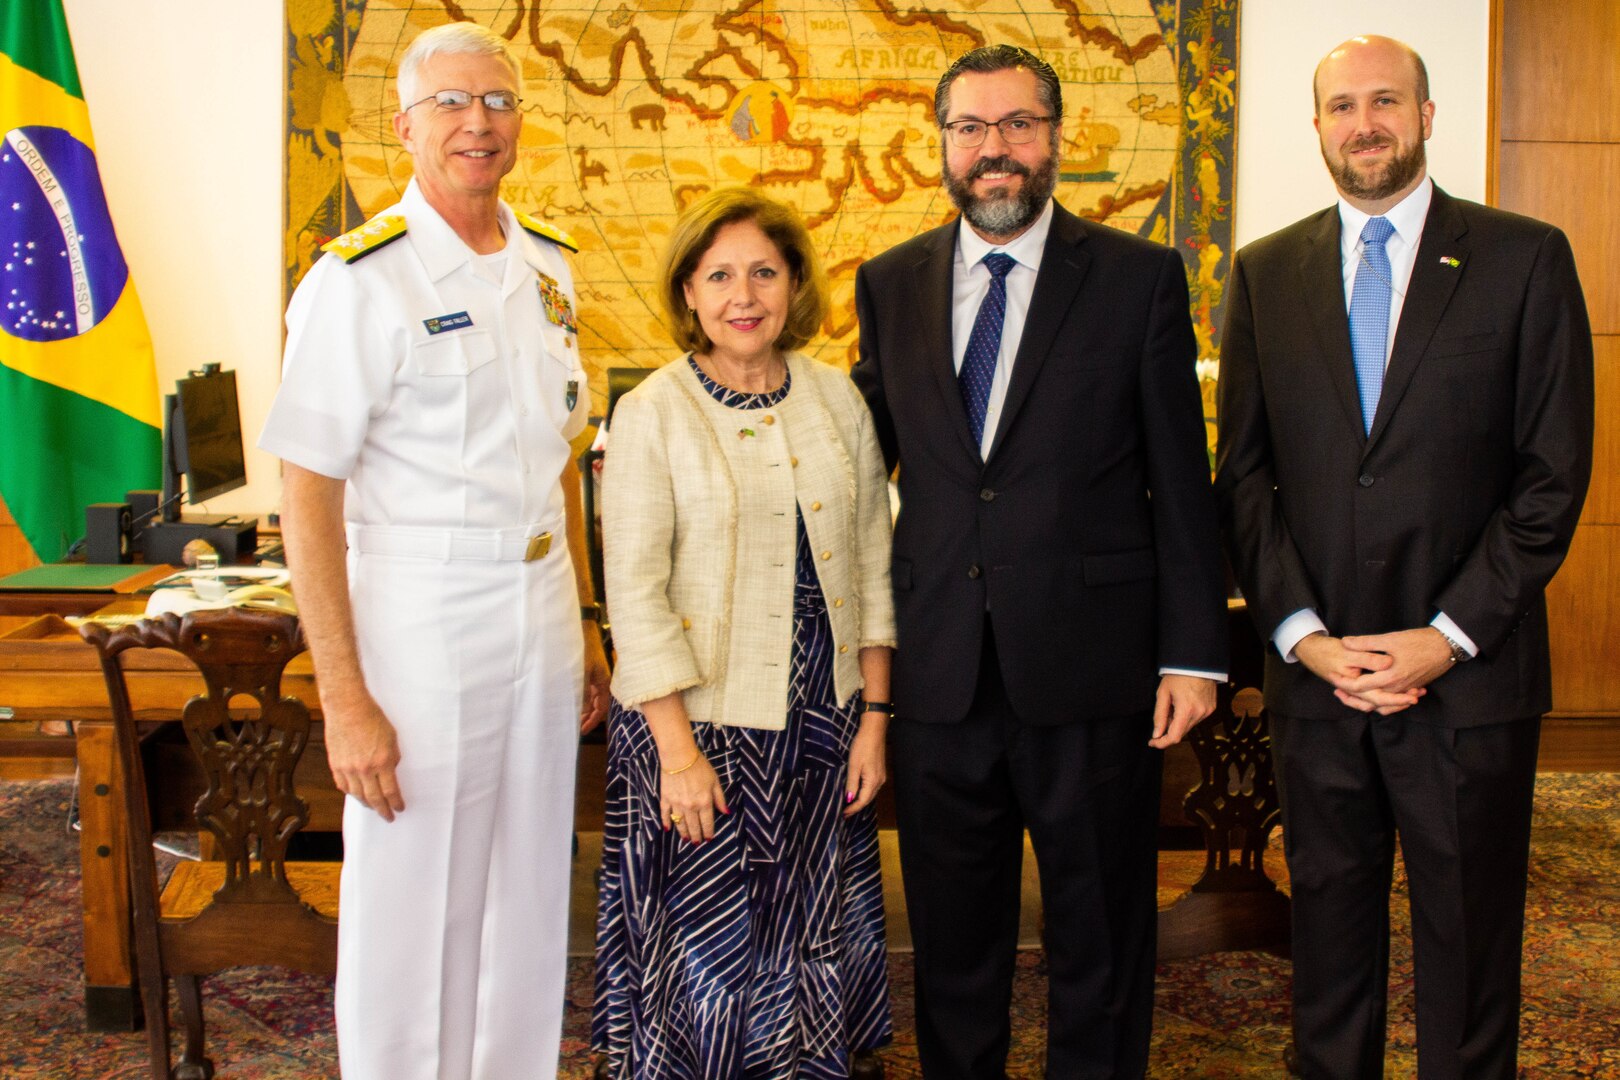 The commander of U.S. Southern Command, Navy Adm. Craig Faller, meets with Brazil's Minister of Foreign Affairs Ernesto Araúj and U.S. Chargé d’Affaires William Popp in Brazil Feb. 11, 2019.